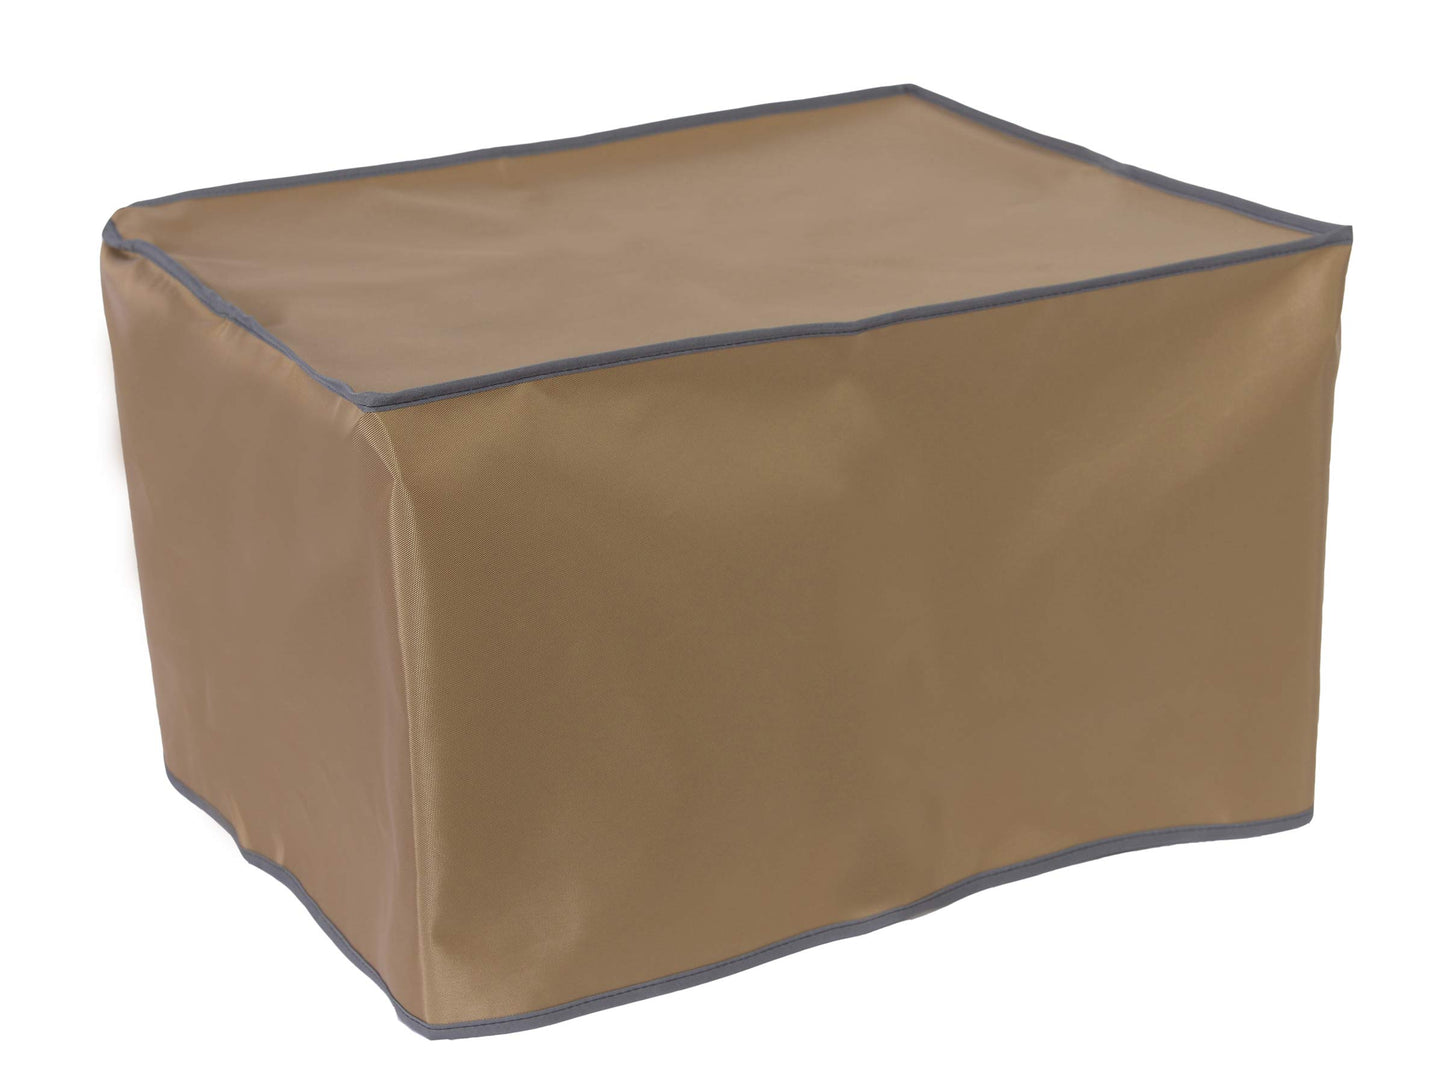 The Perfect Dust Cover, Tan Nylon Short Cover for Canon ImagePROGRAF PRO-4000 44'' Professional Photo Printer, Anti Static Waterproof Dimensions 62.7''W x 33''D x 19''H by The Perfect Dust Cover LLC